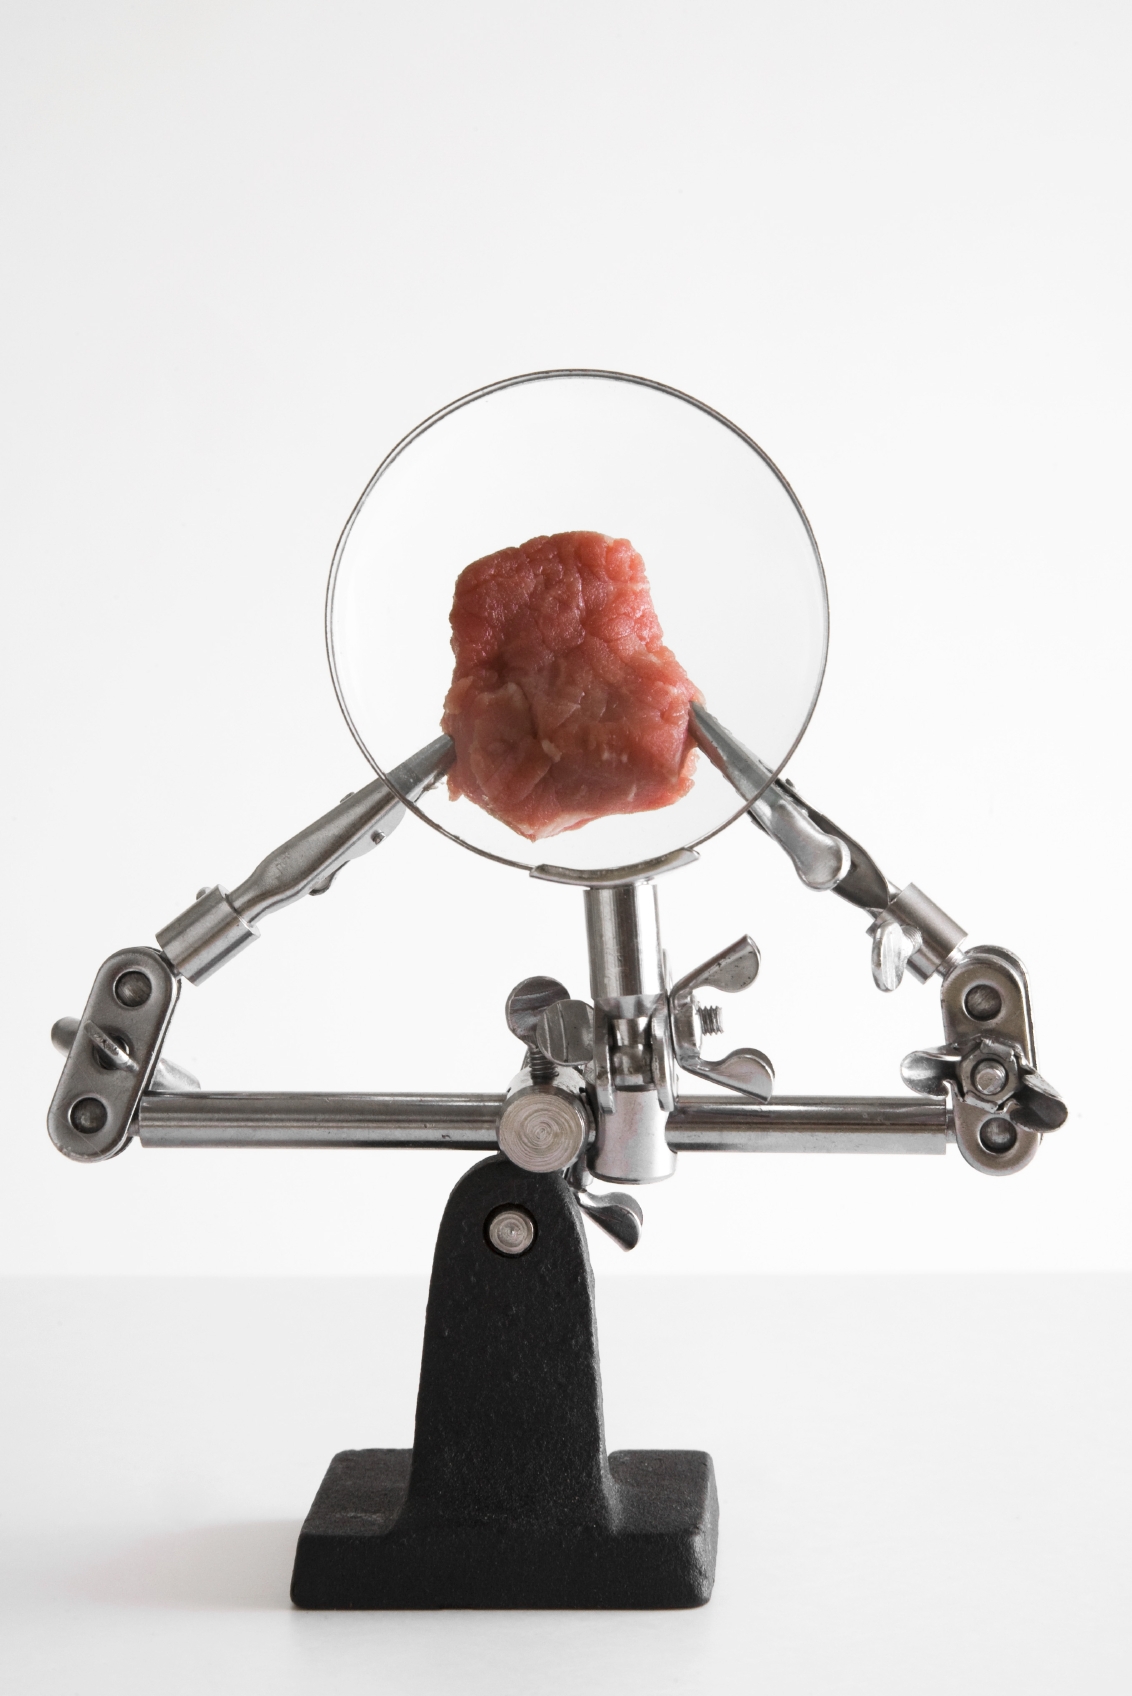 A piece of meat is examined through a magnifying glass on a stand.